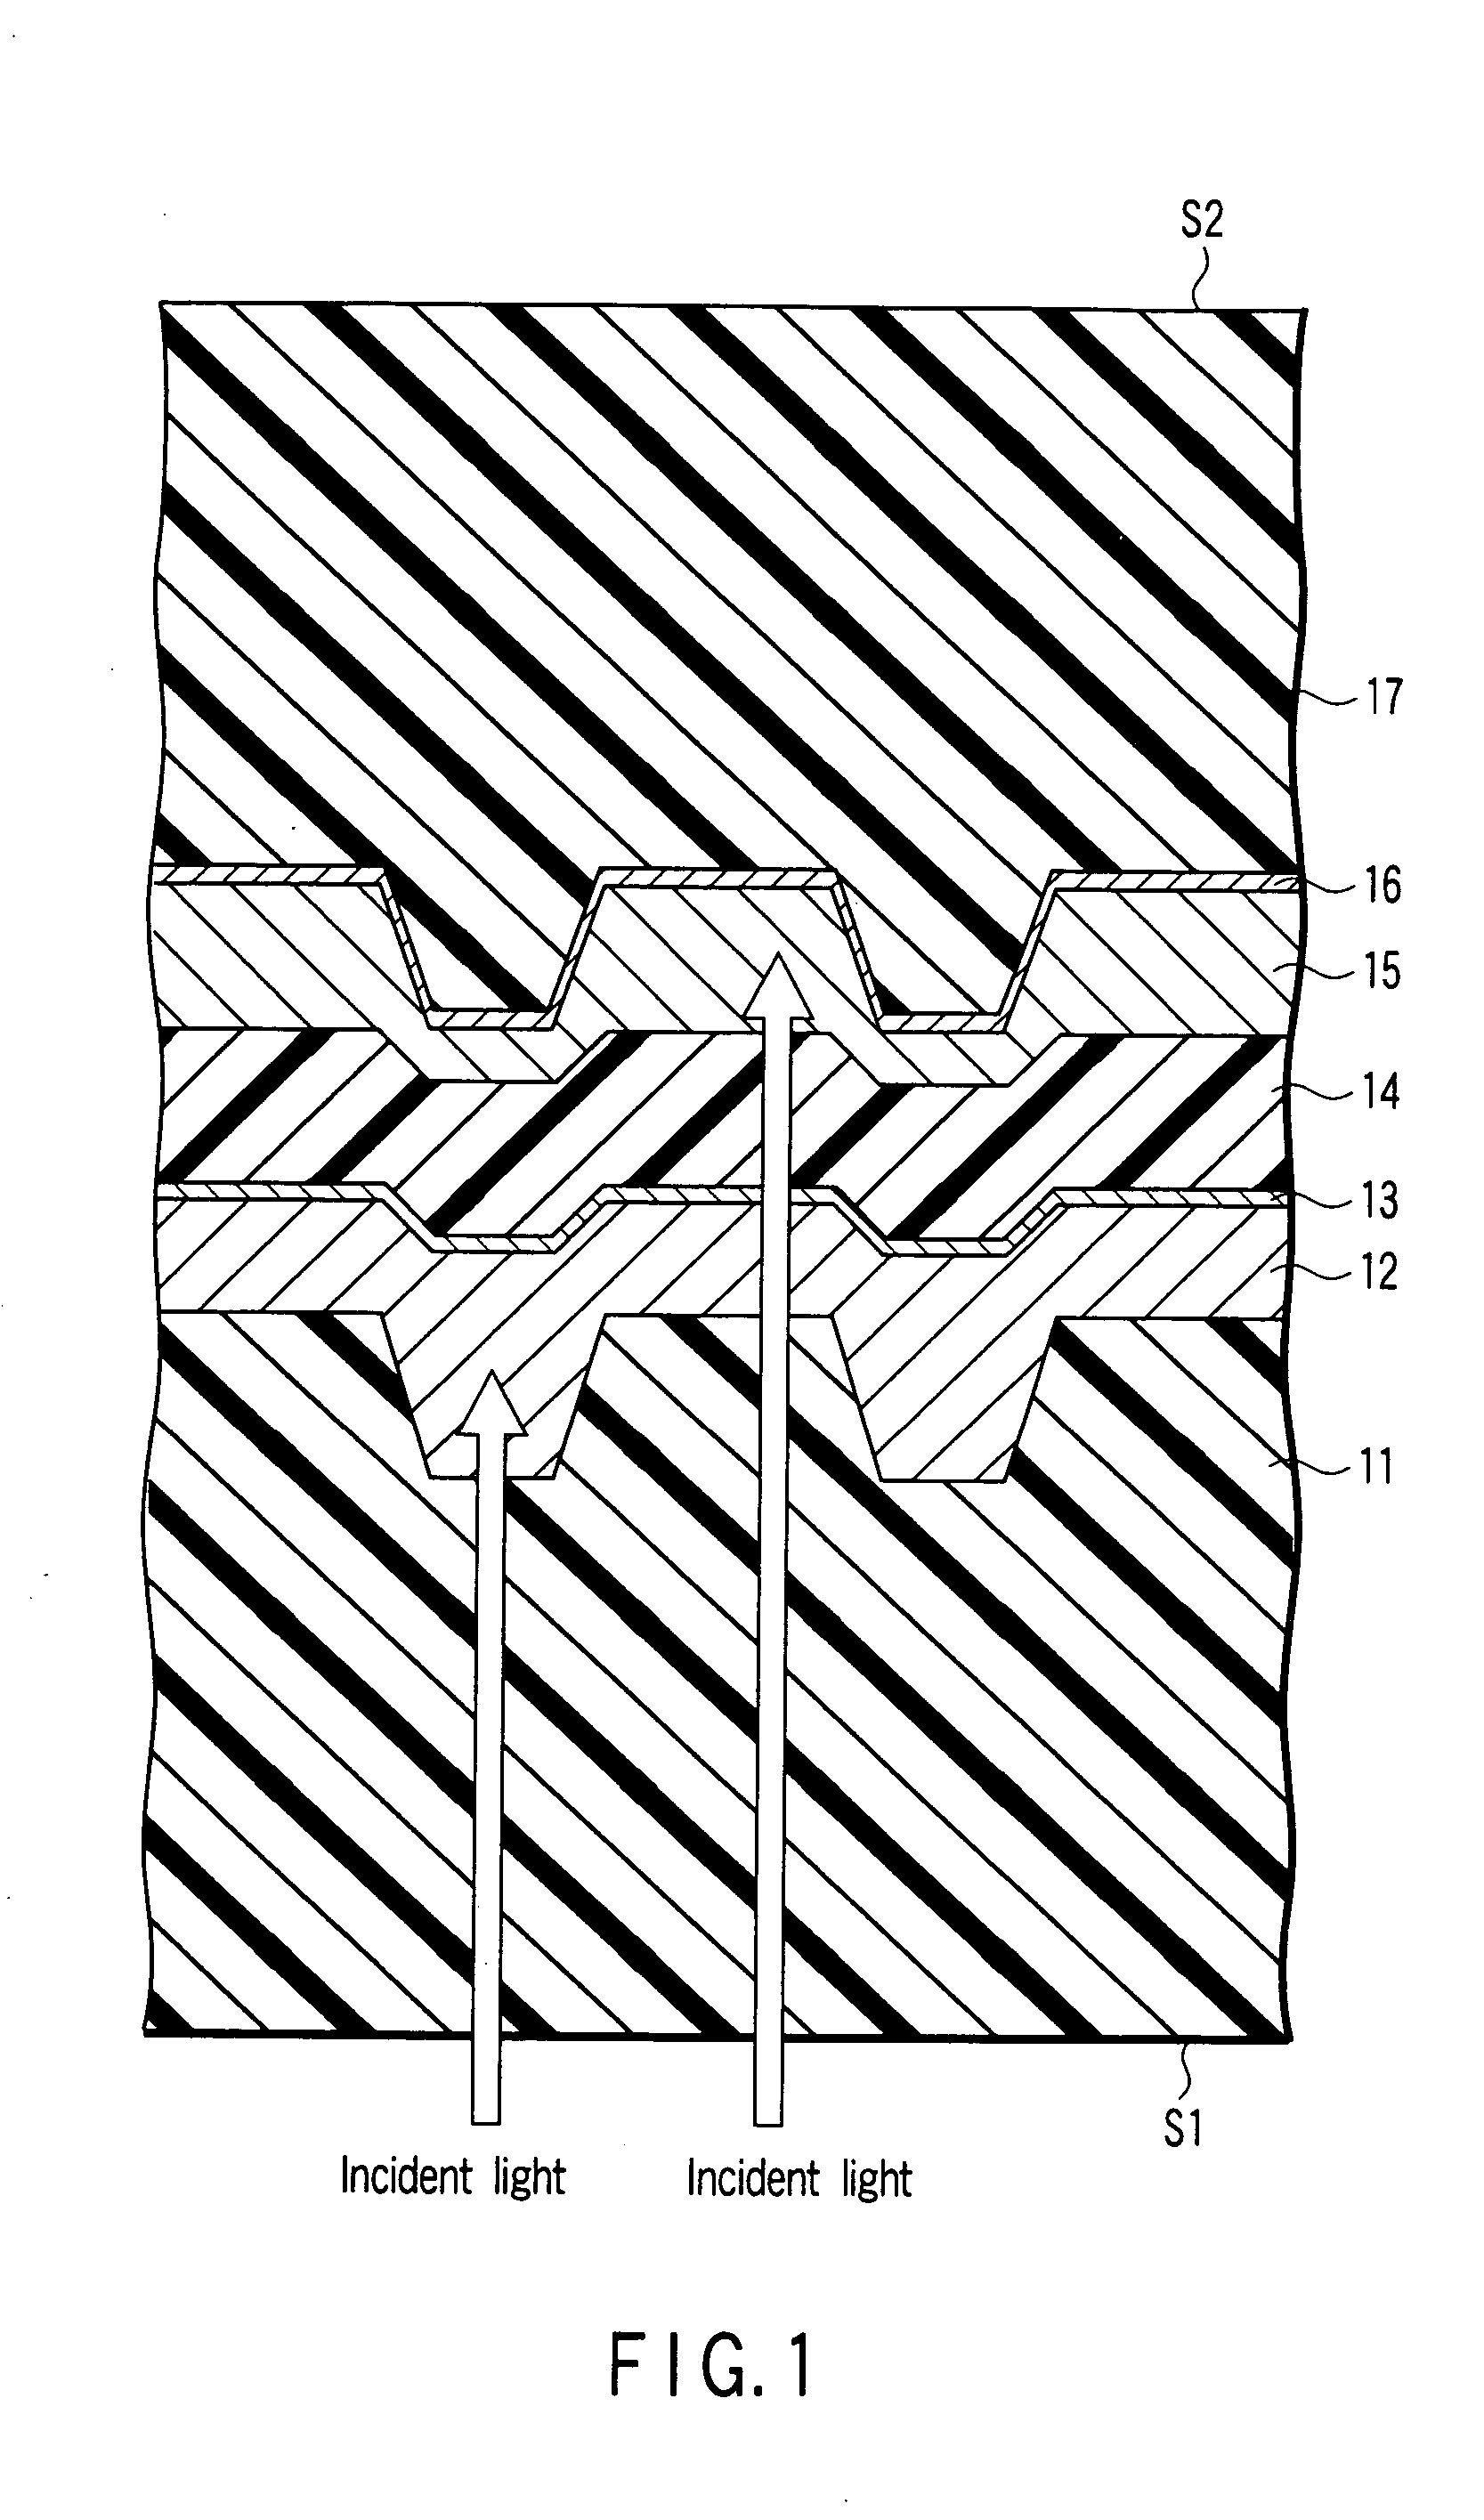 Optical disk and information playback apparatus